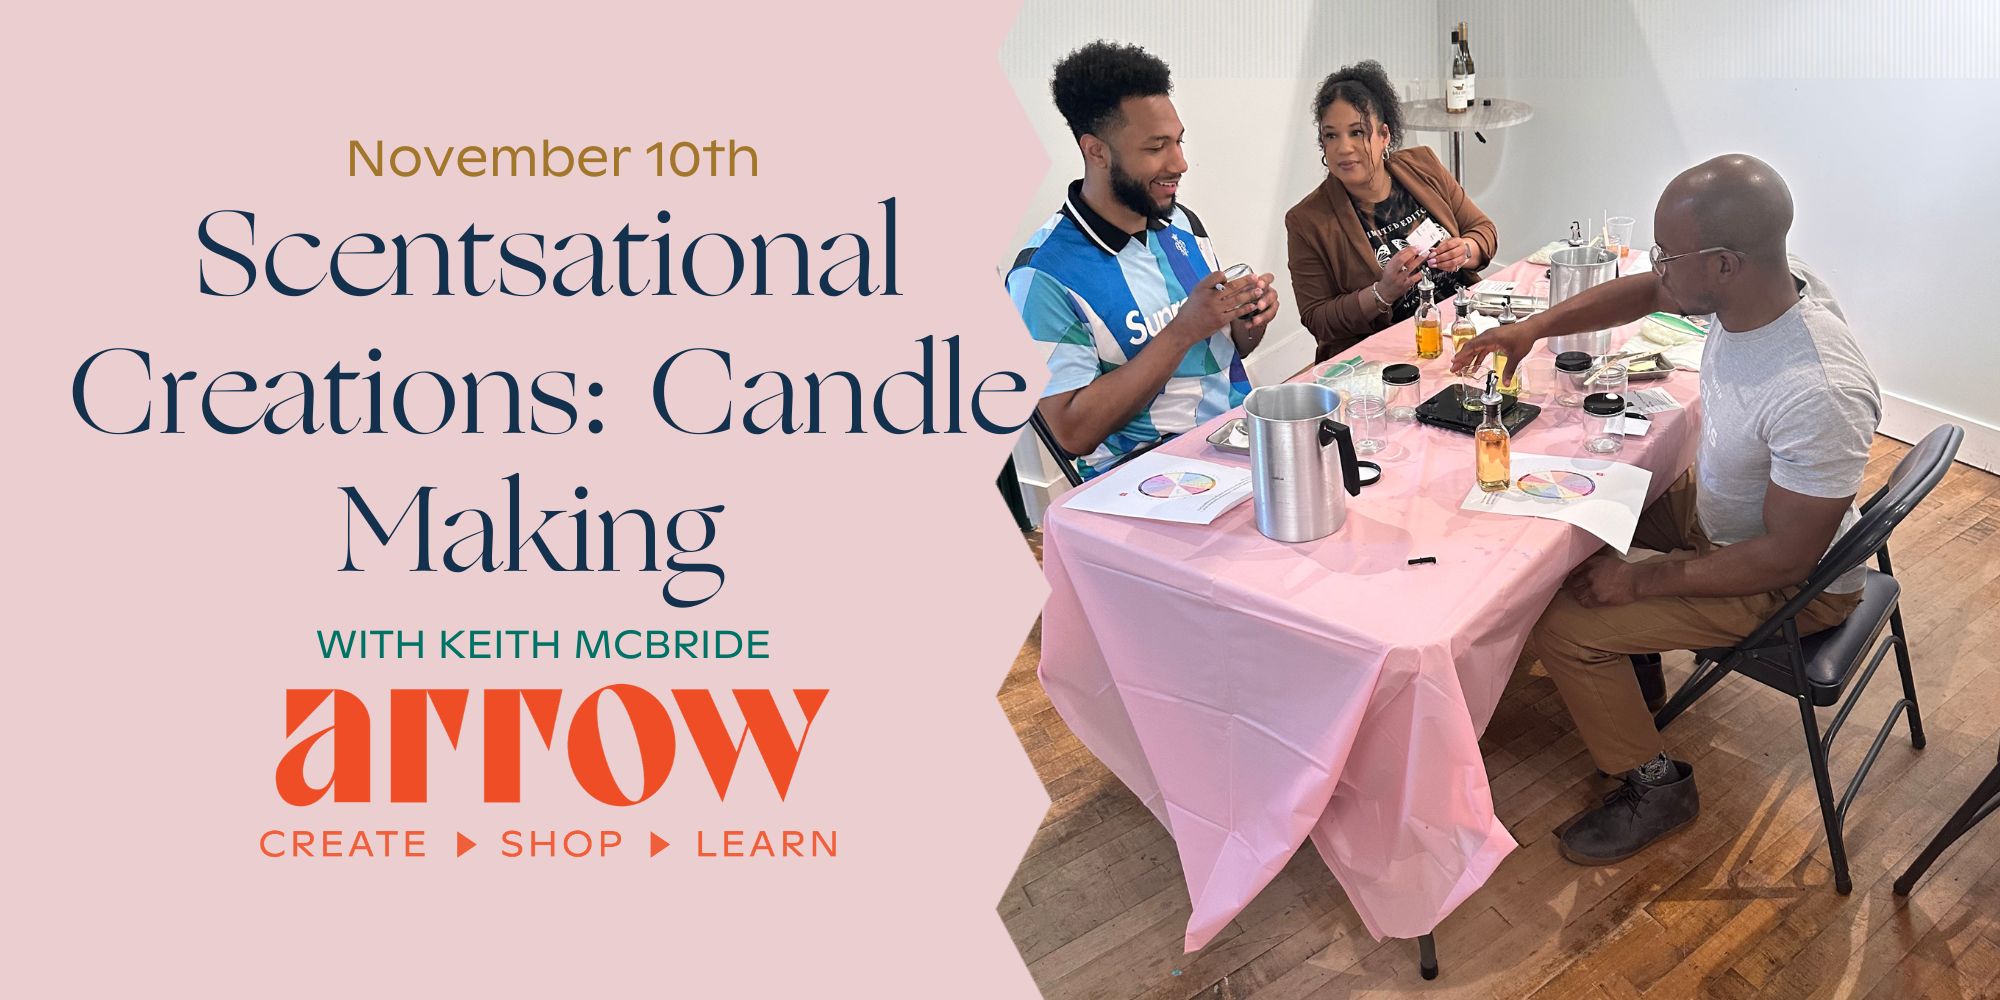 Sensational Touch - Candle Making Scents, Candle Making Workshop